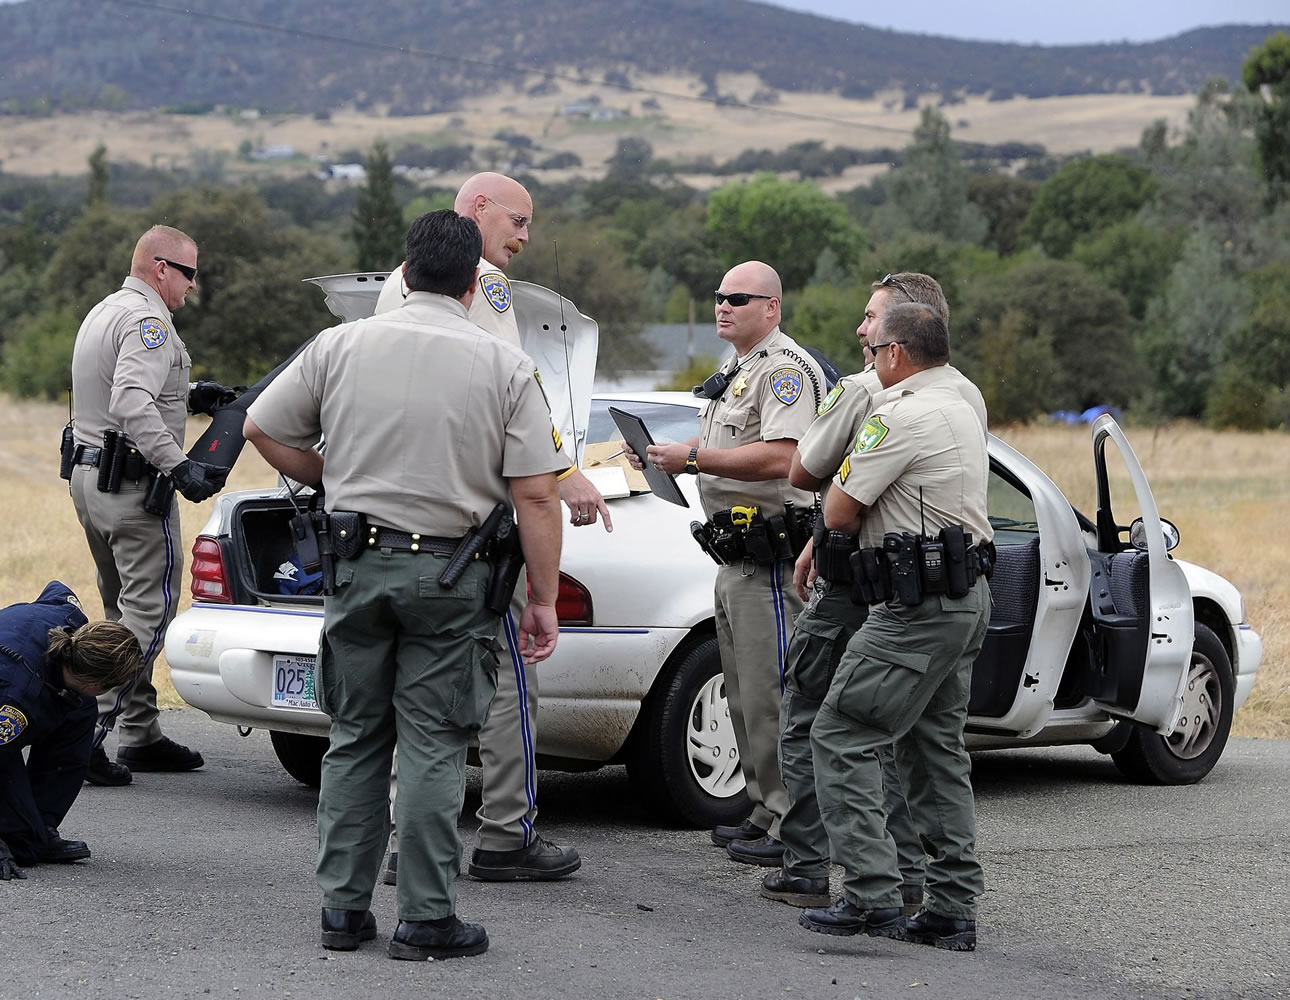 Law enforcement officials check out a vehicle Wednesday following a traffic stop and the arrest of murder suspects David Joseph Pedersen and Holly Ann Grigsby near Yuba City, Calif.